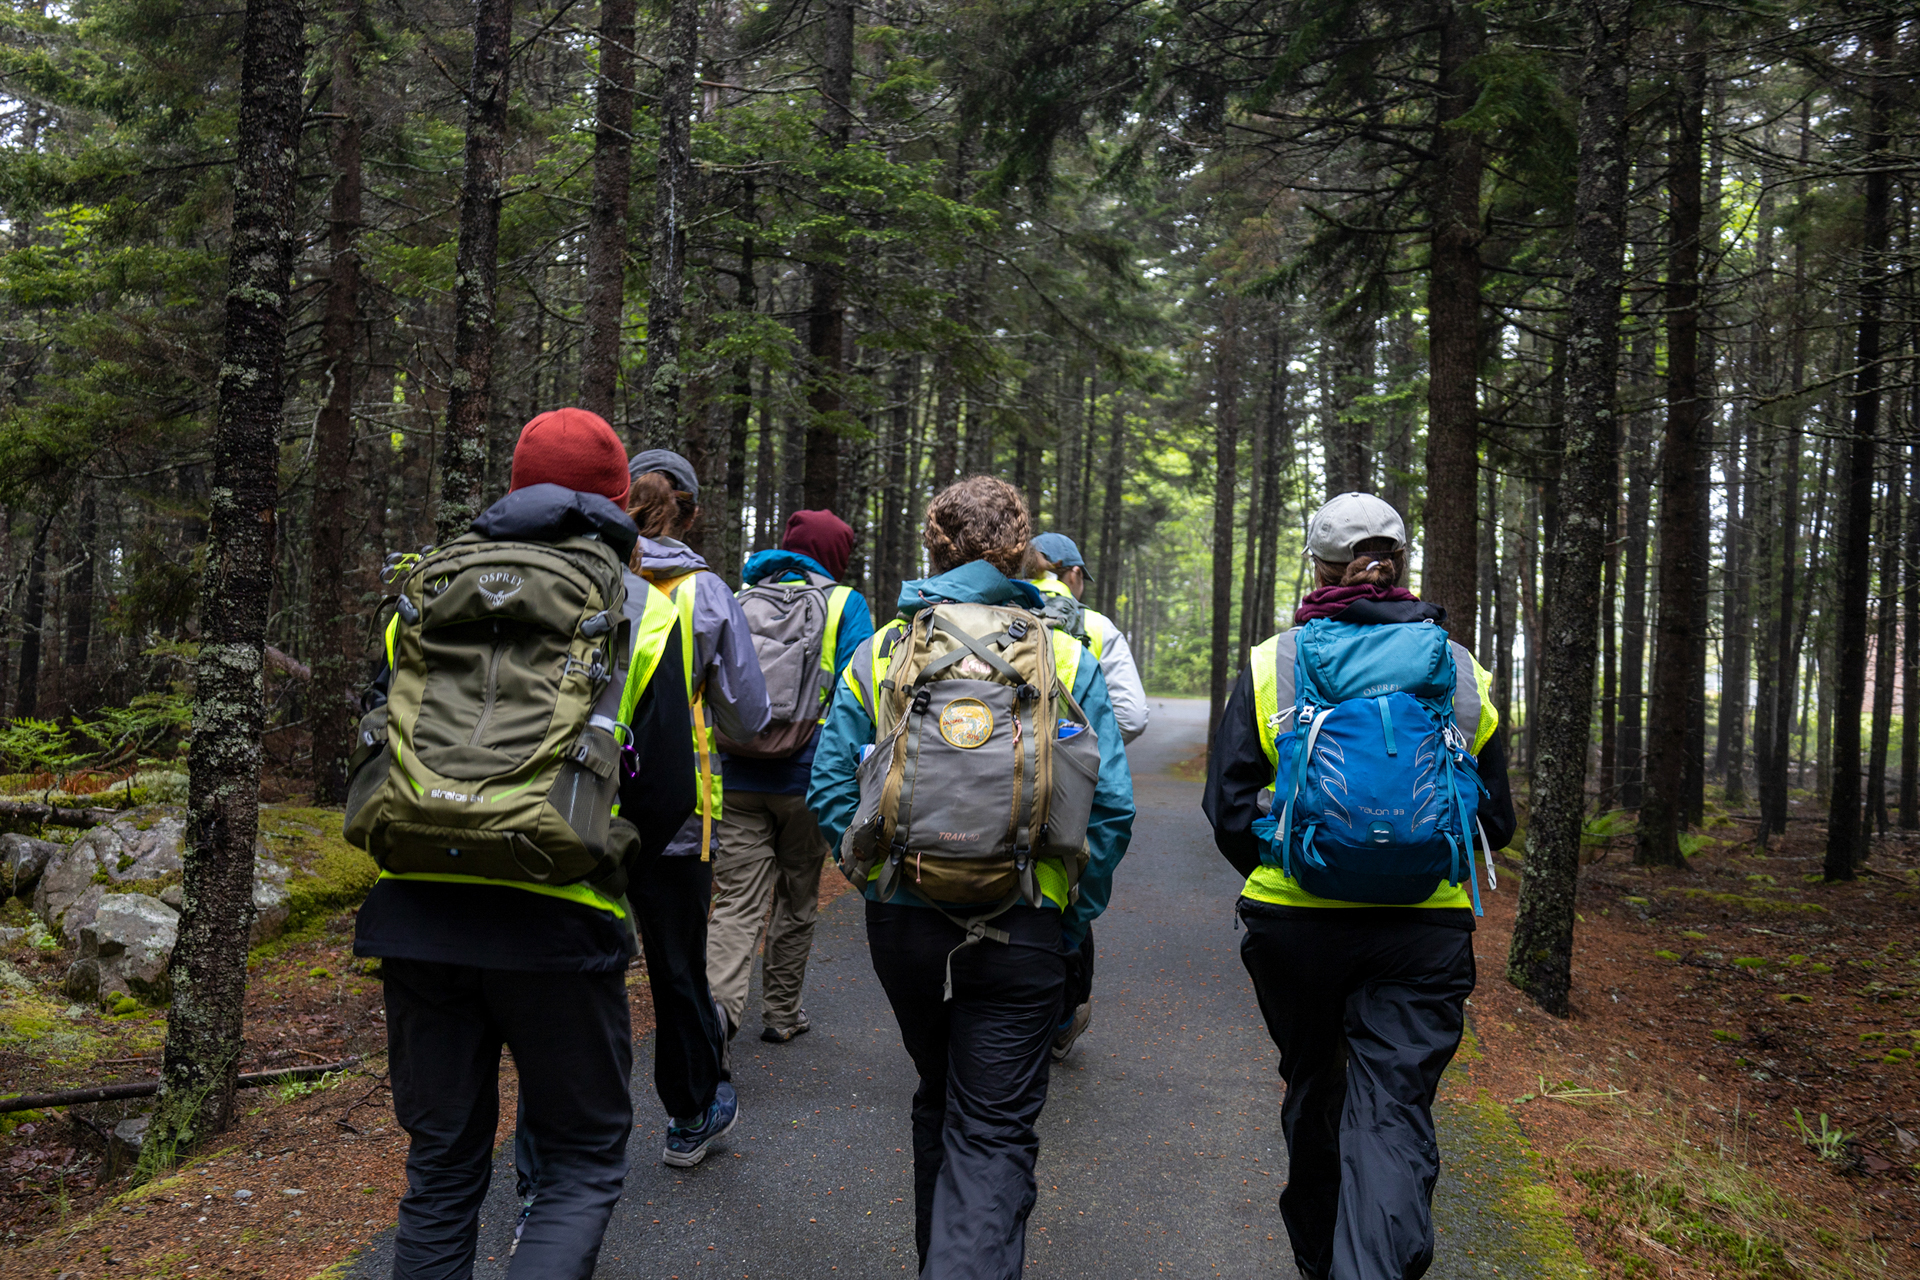 Six people wearing rain jackets and backpacks walk down a paved path through dark spruce trees.